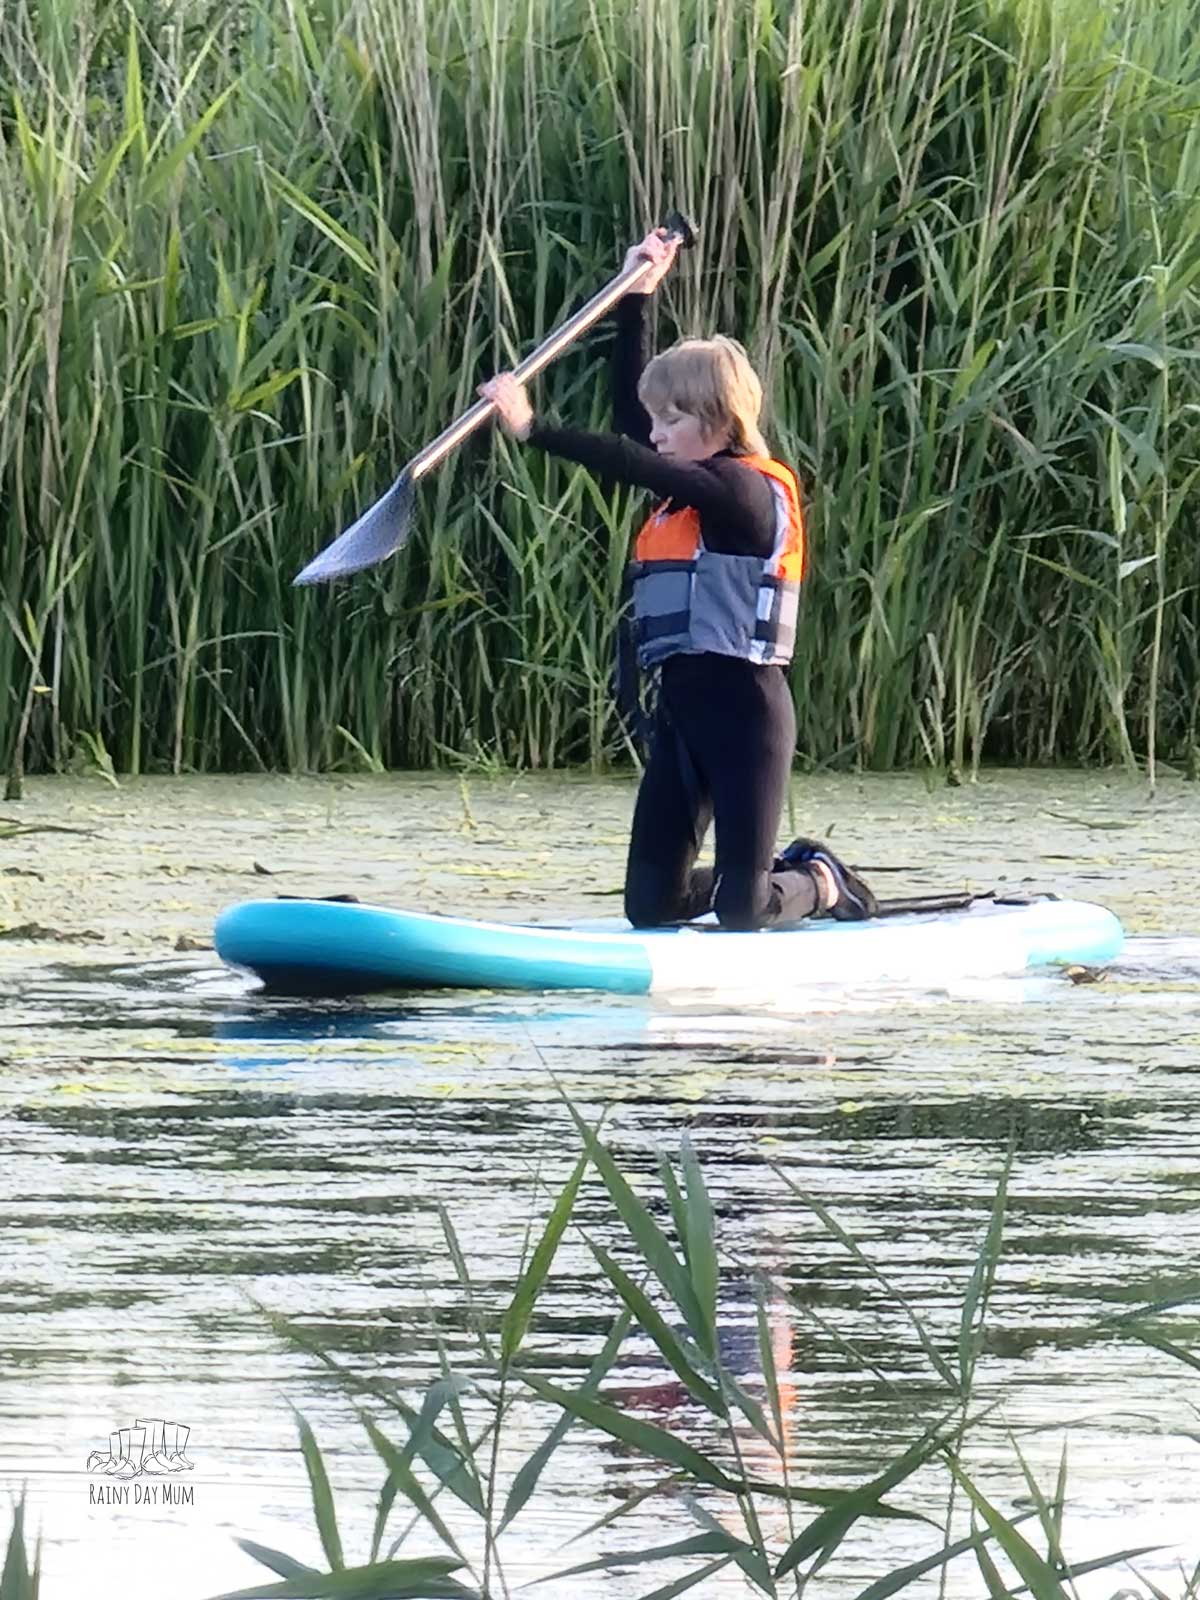 Tween paddling on a river with the reeds and rushes in the background.